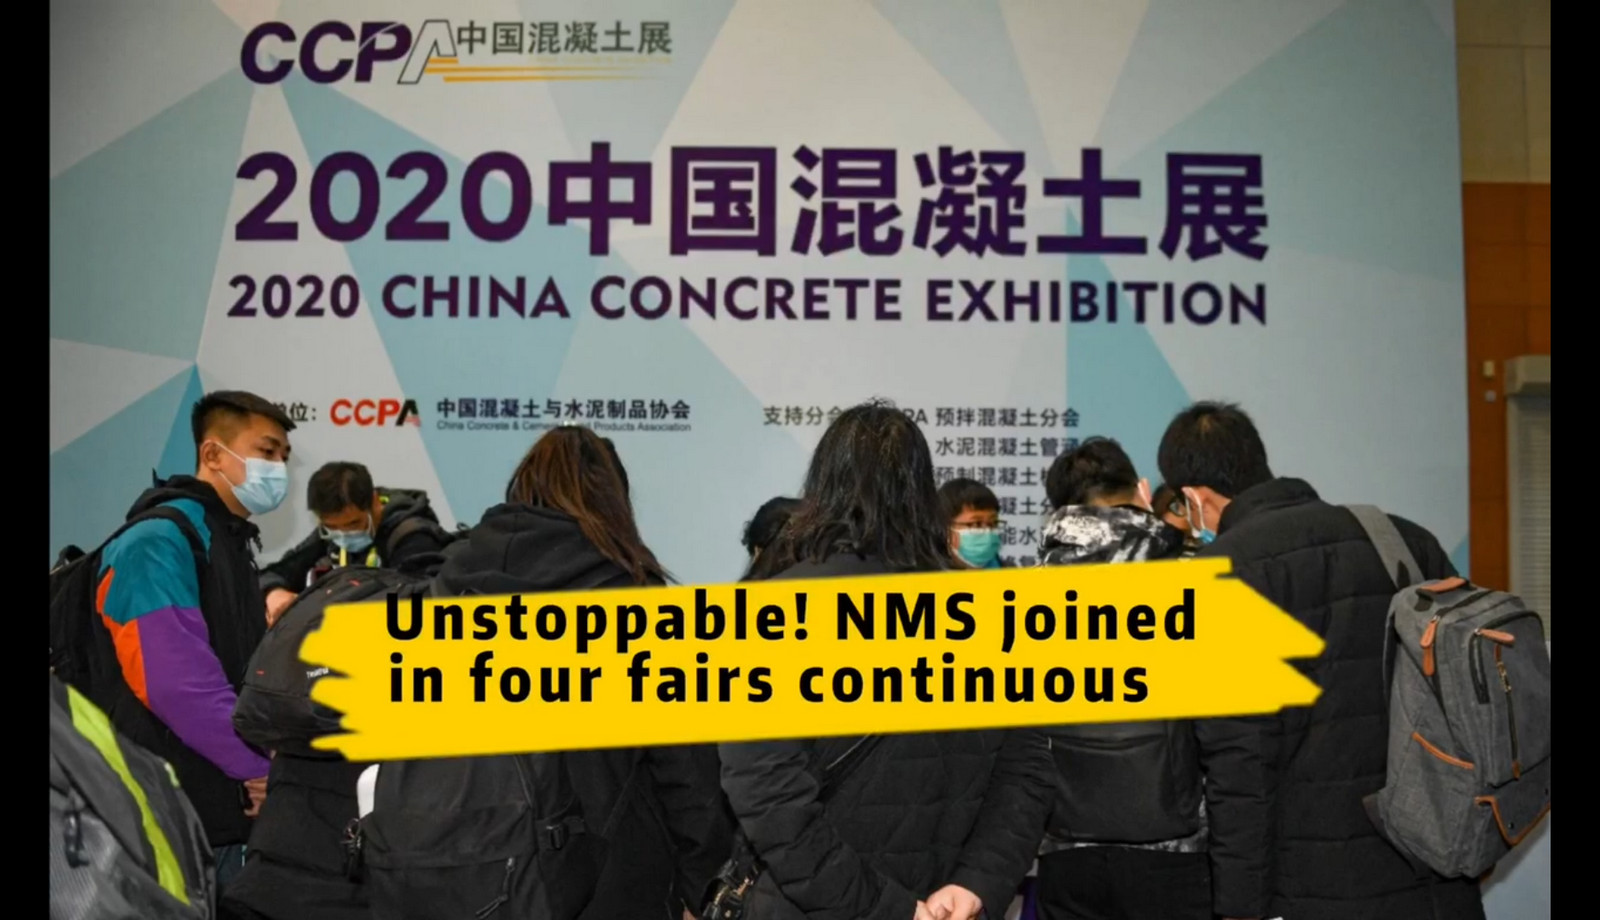 Unstoppable! NMS Joined in Four Fairs Continuously